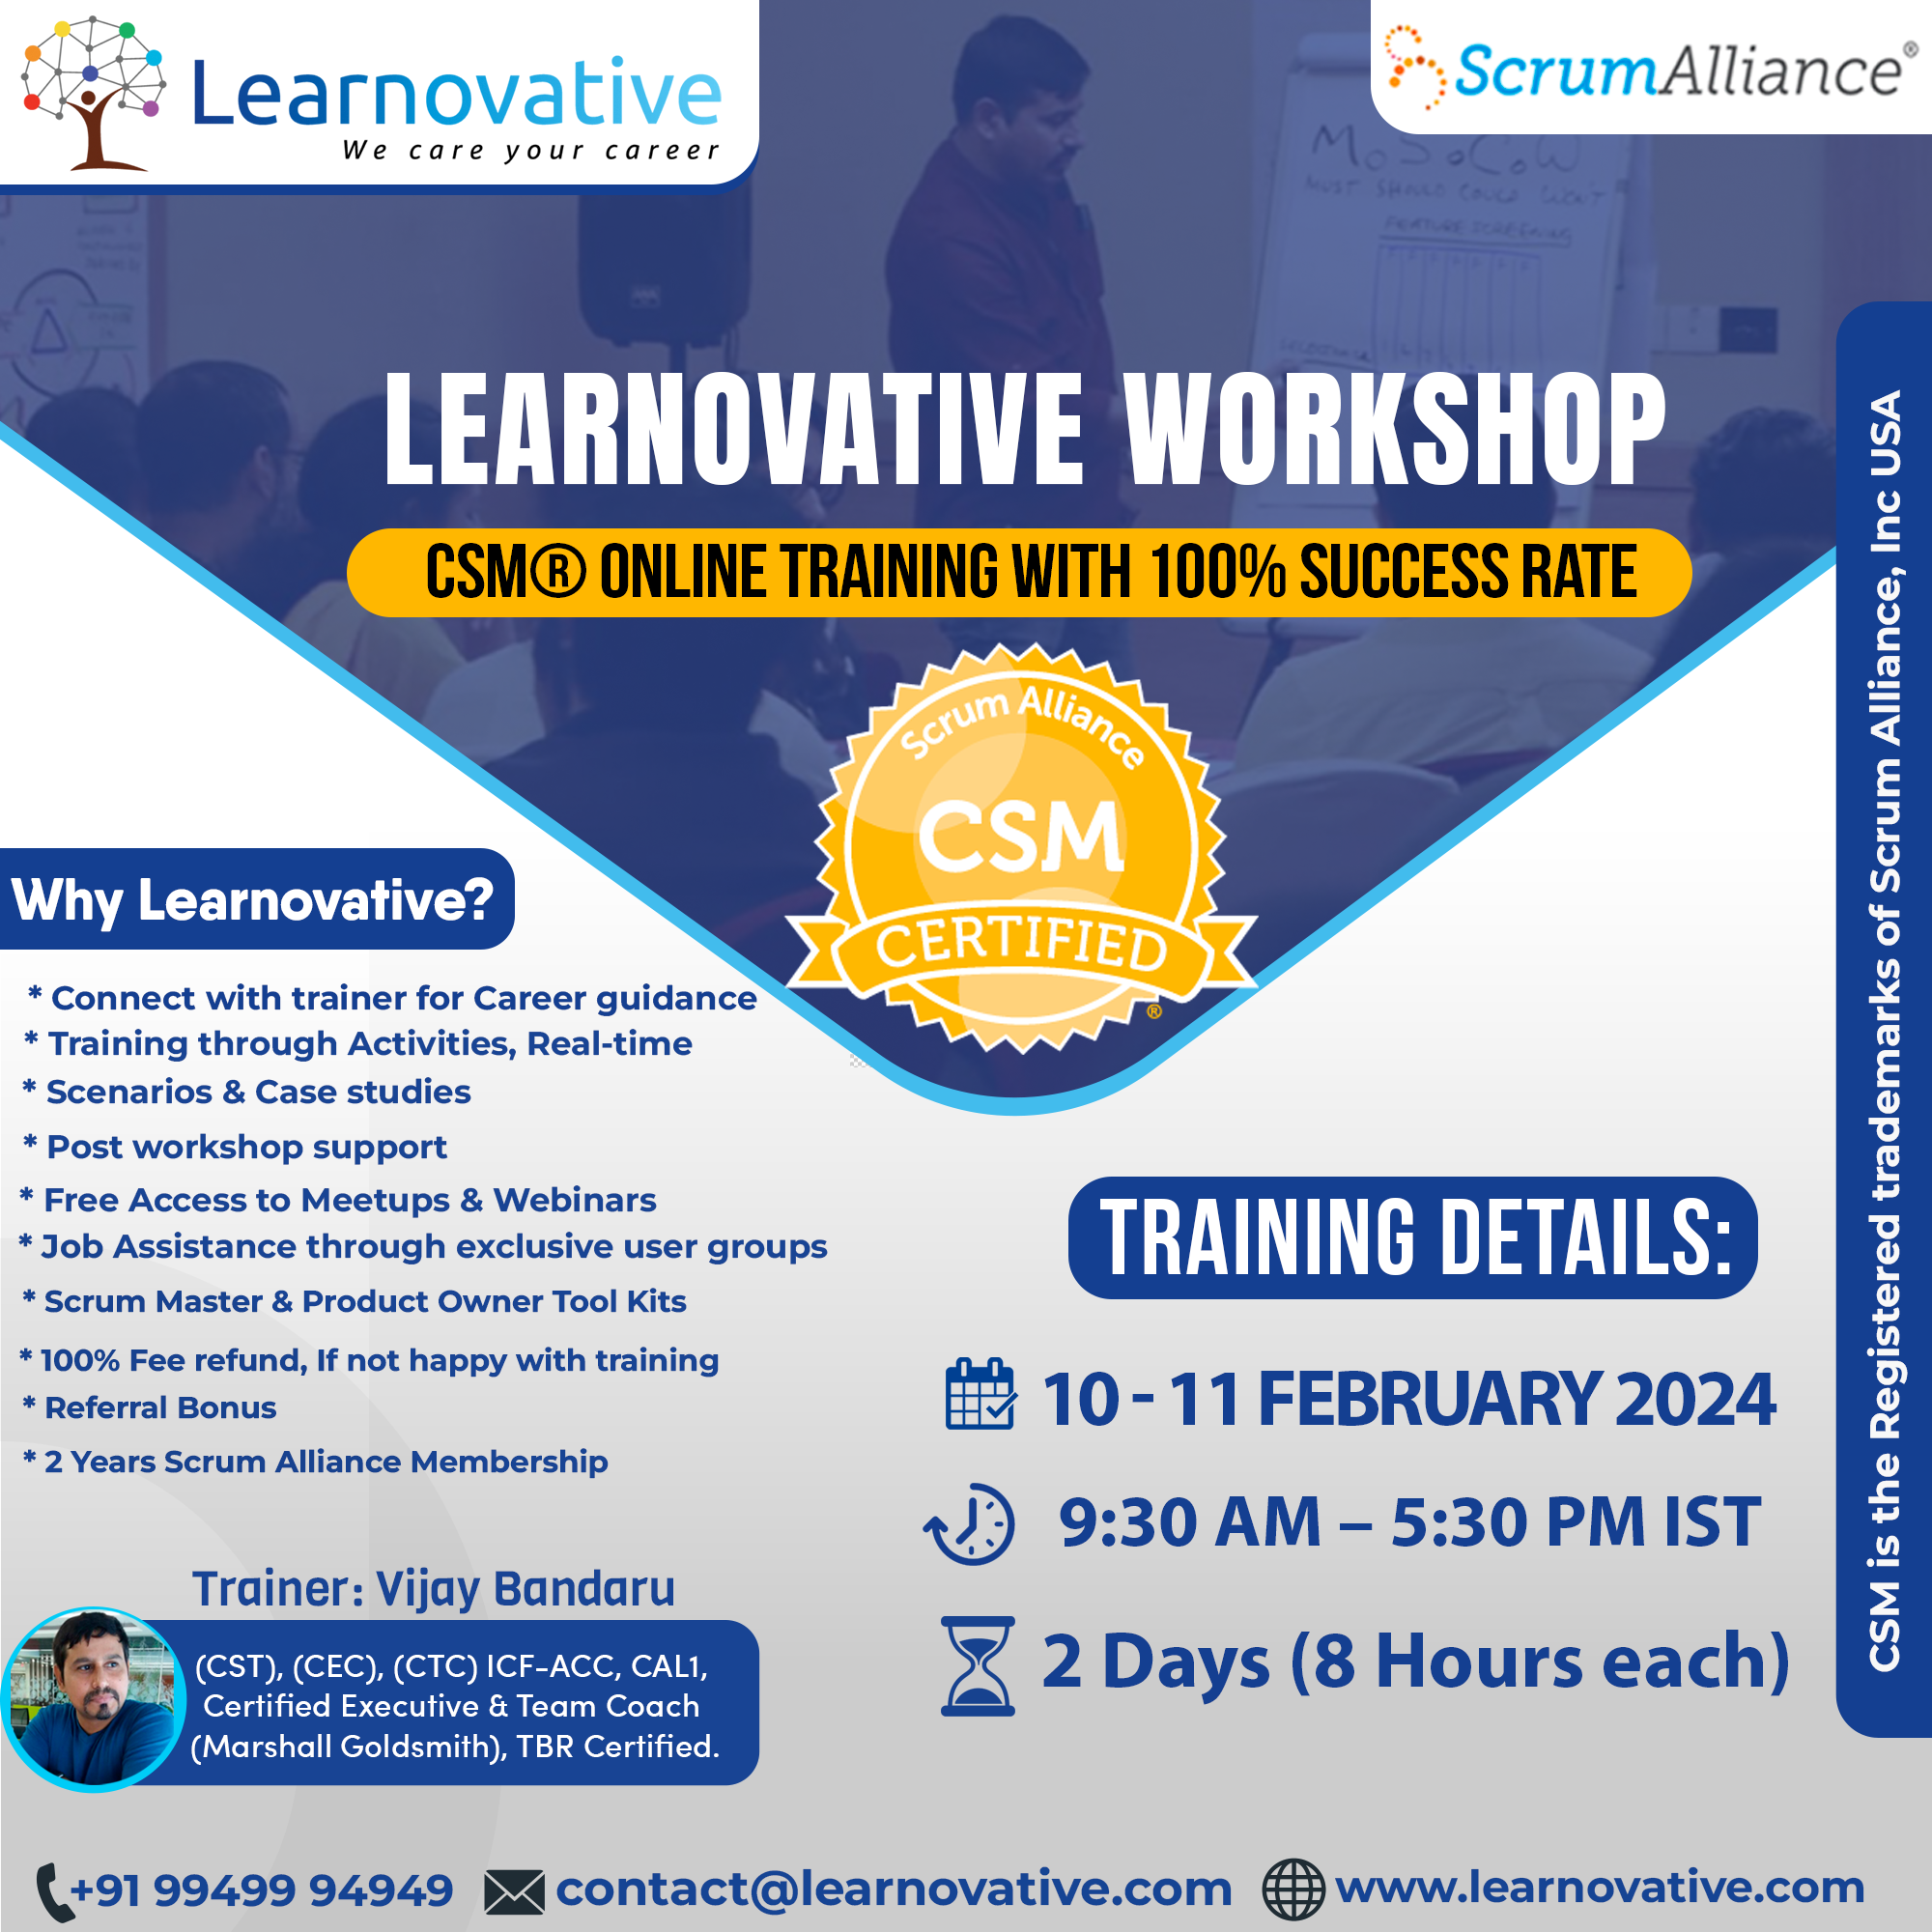 CSM Online Training on 10 - 11 february 2024 | Learnovative| CSM Scrum Master Training and Certification In Hyderabad, Online Event